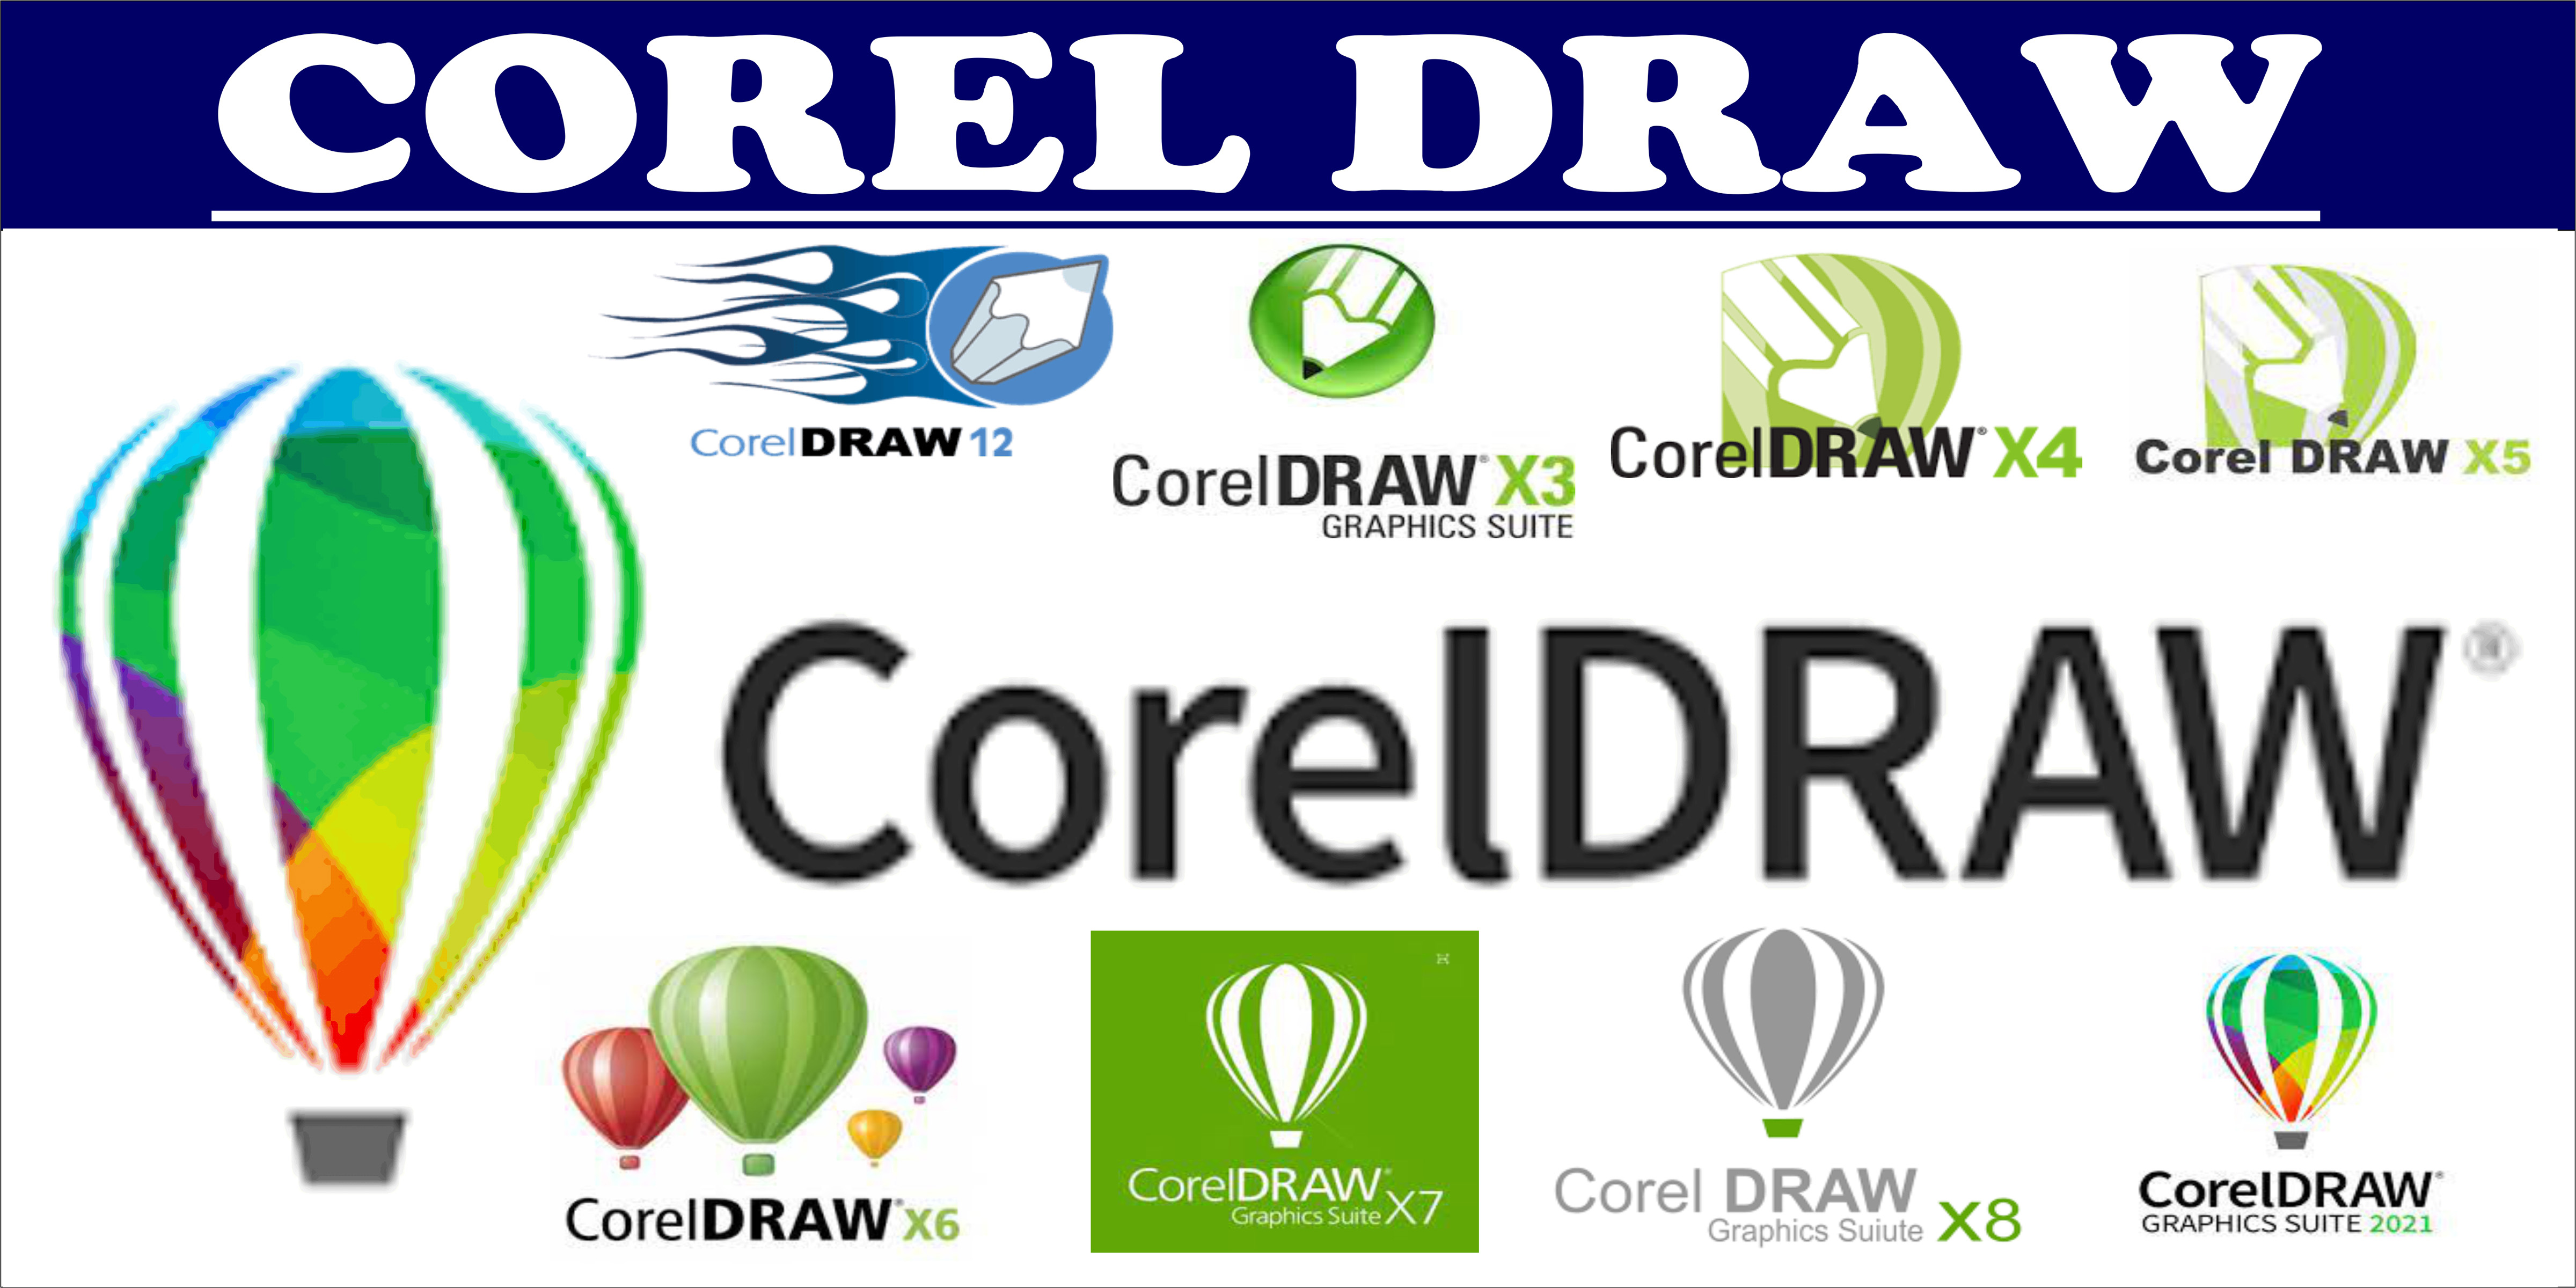 The Latest Updates To The CorelDRAW Graphics Suite Boost Creativity And  Productivity — TEXINTEL